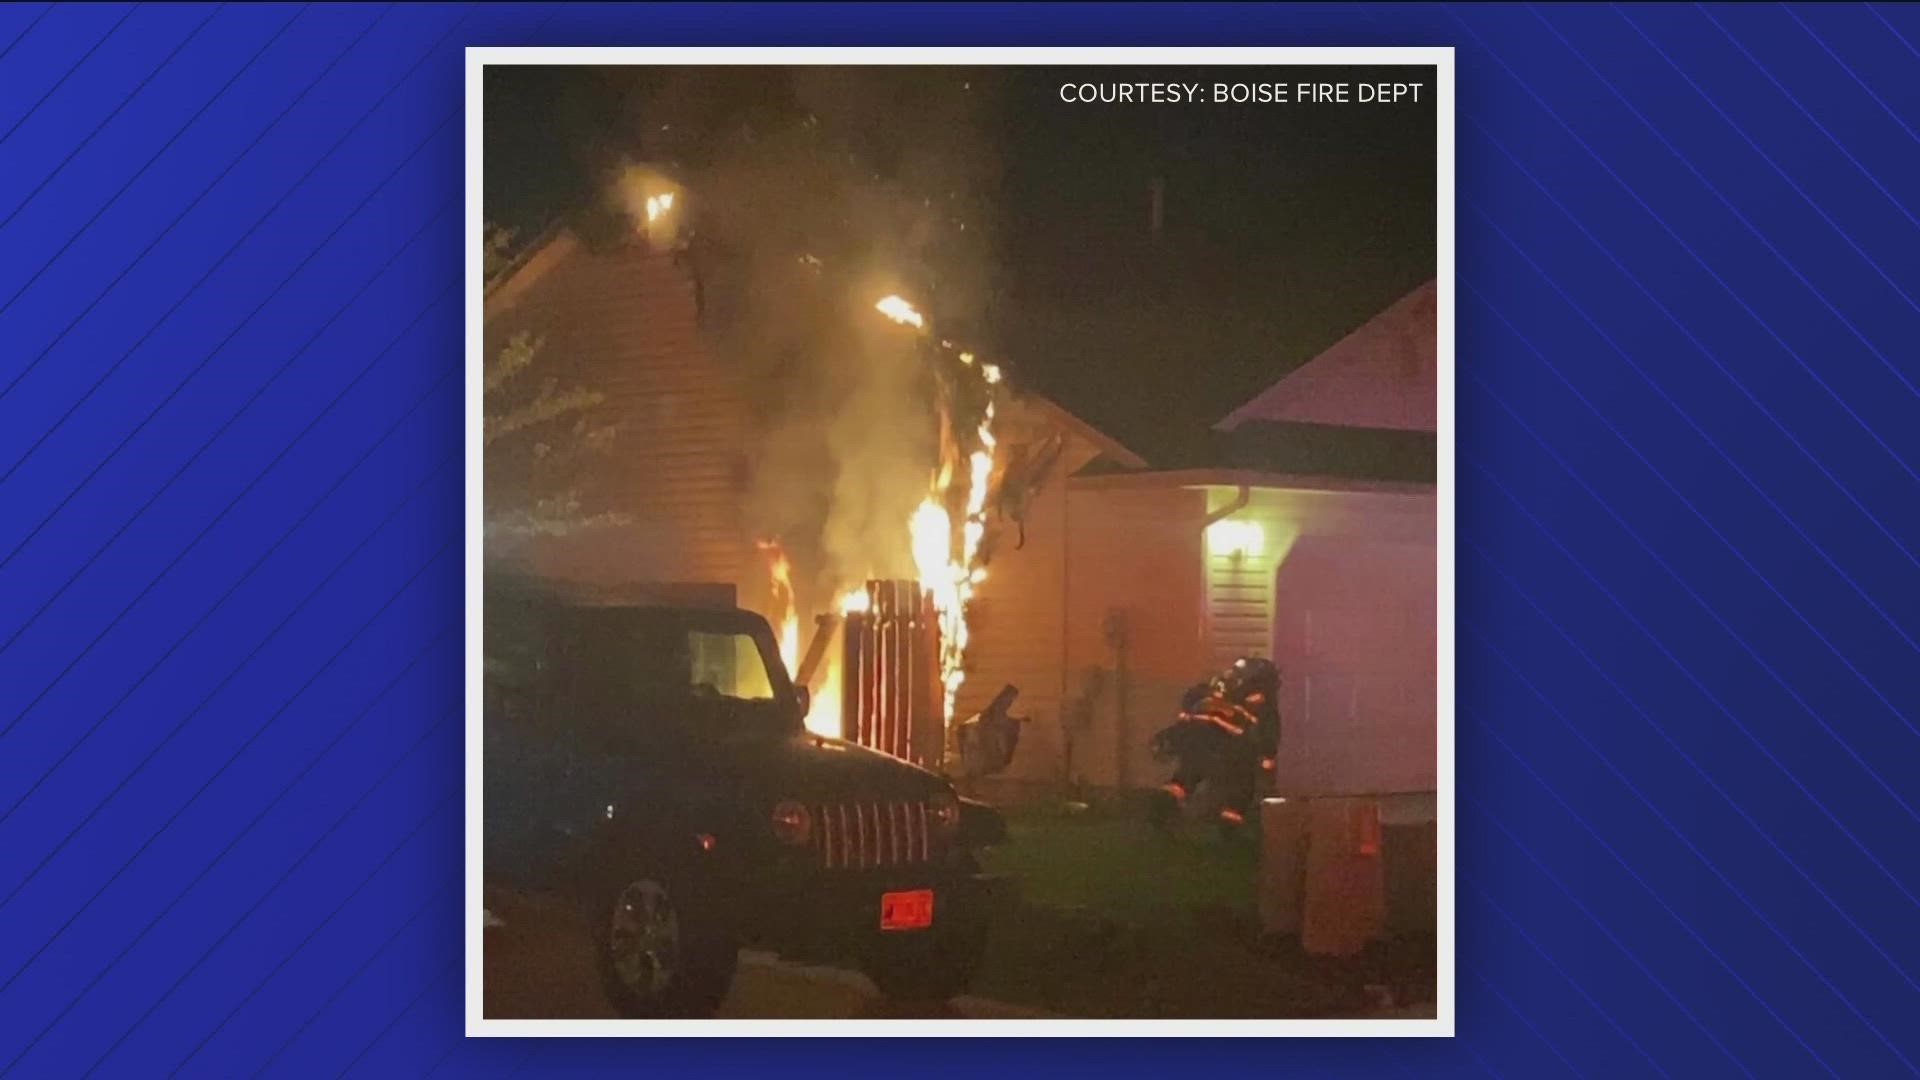 Firefighters quickly worked to halt flames on the exterior of a home located on West Foxfire Street Thursday. No residents, fire personnel or pets were injured.